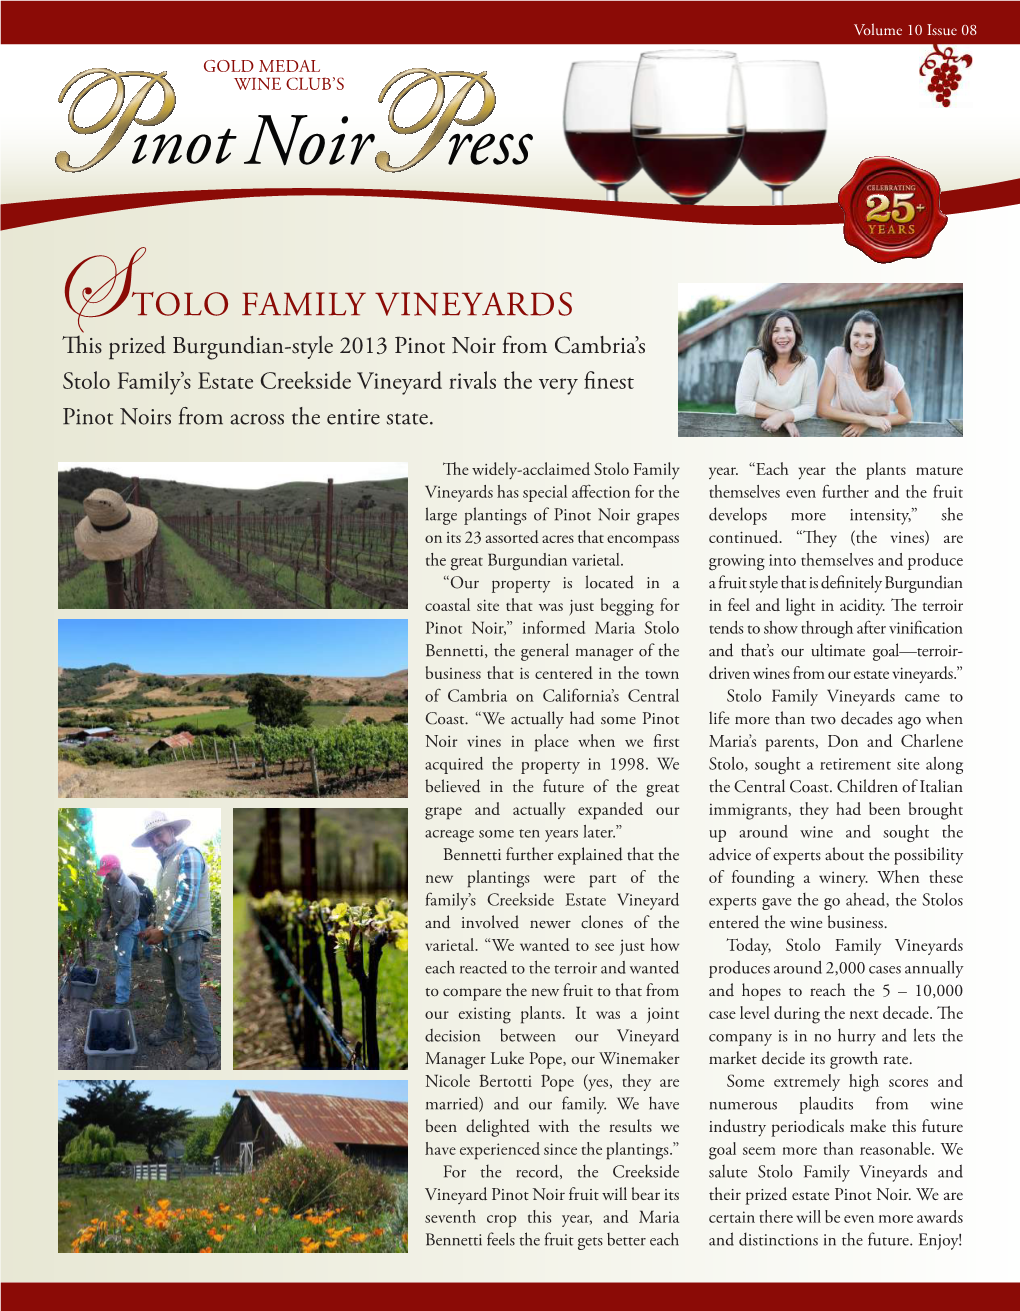 Stolo Family Vineyards and and Vineyards Family Stolo Salute Creekside the Record, the For